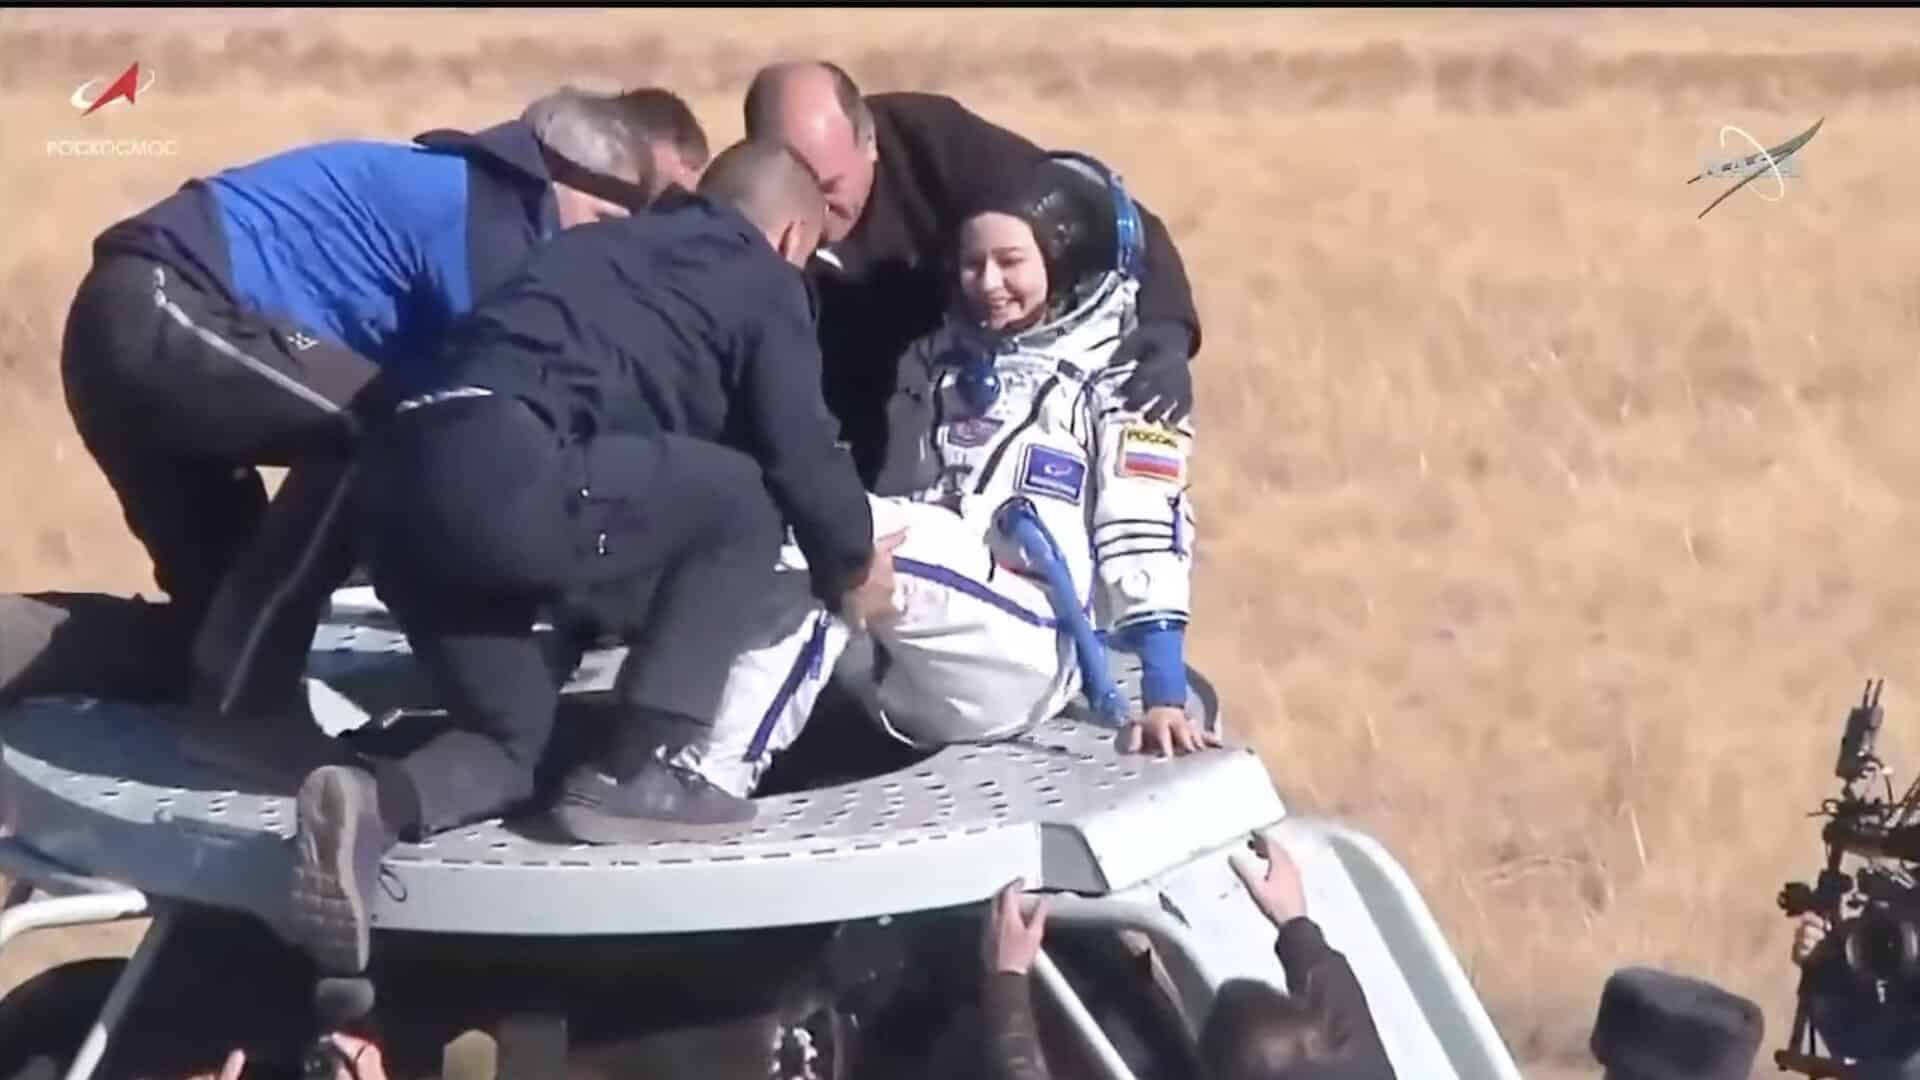 Russian actor, film director return to Earth after shooting scenes on International Space Station